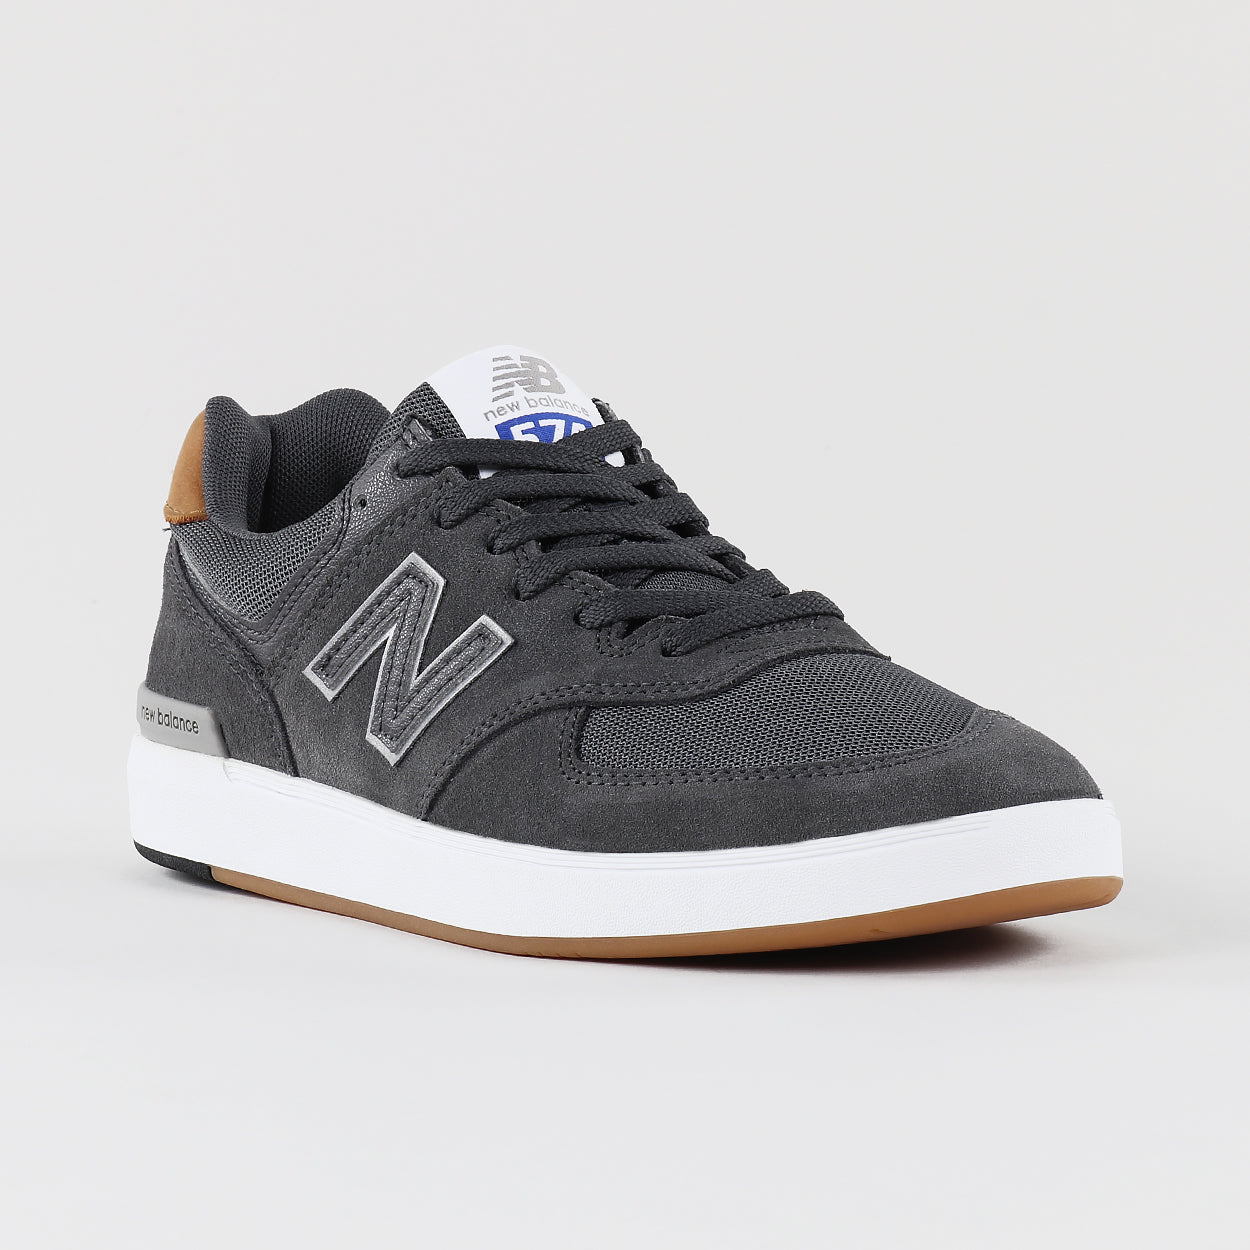 New Balance Numeric 574 Shoes - Charcoal